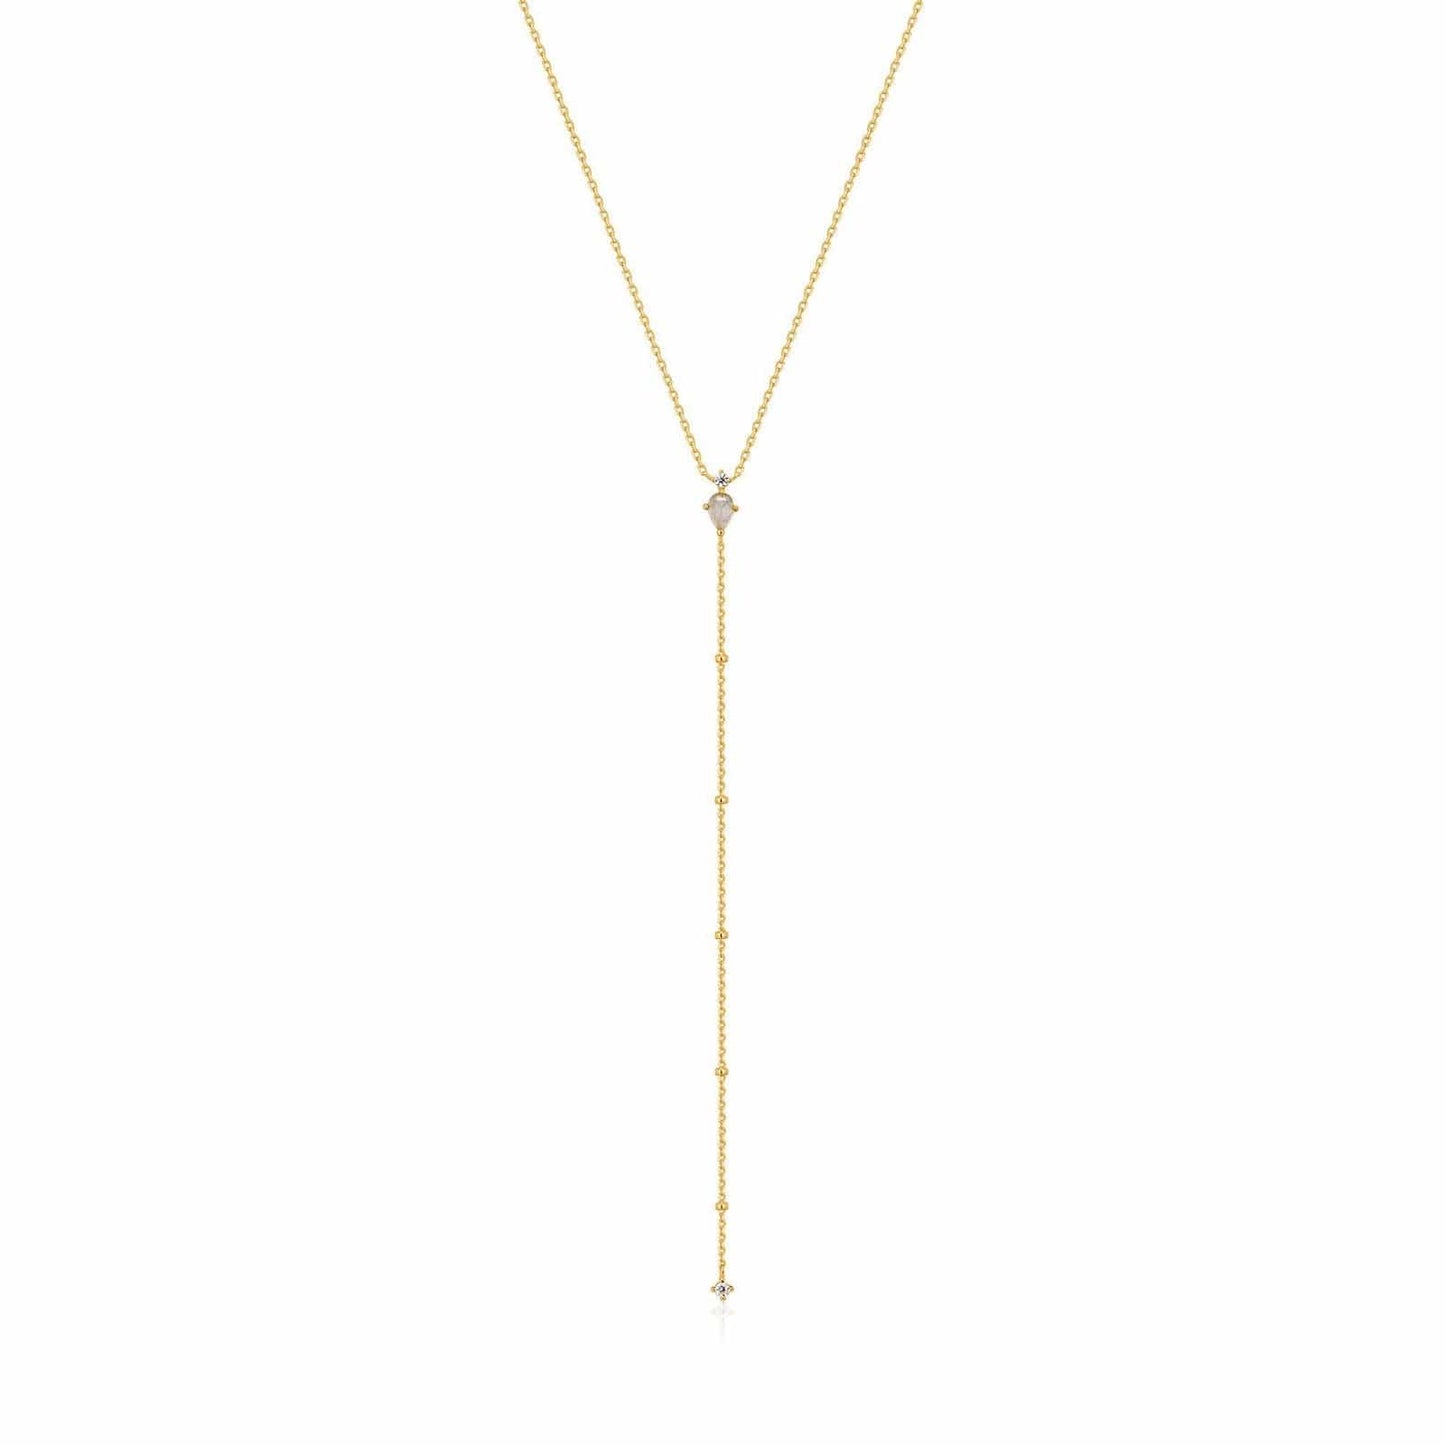 NKL-GPL Gold Midnight Y Necklace